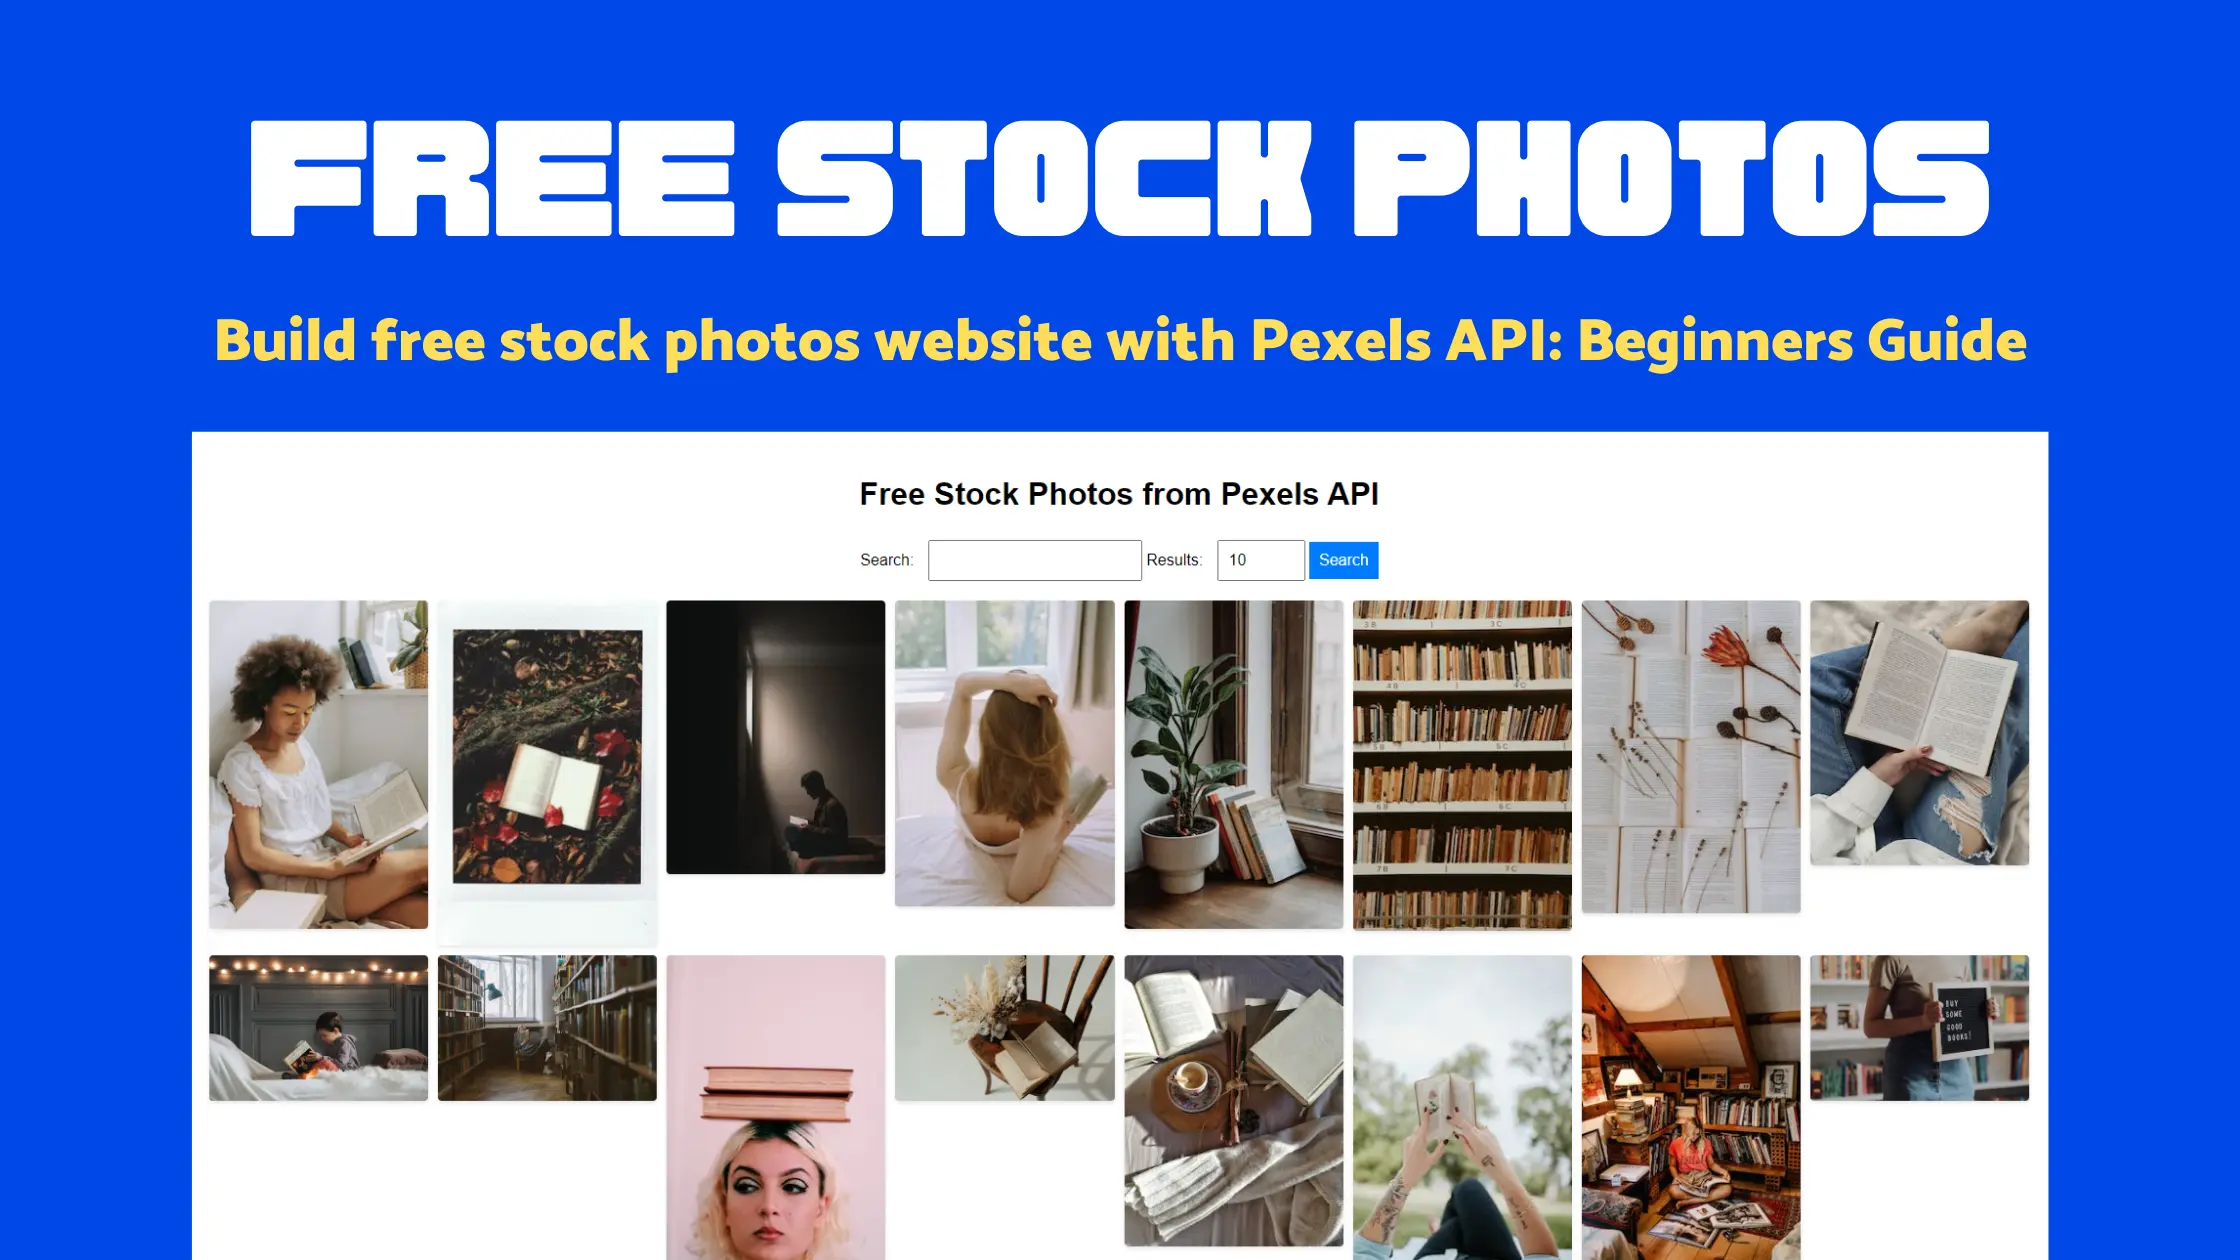 Build free stock photos website with Pexels API Beginners Guide - Featured Image